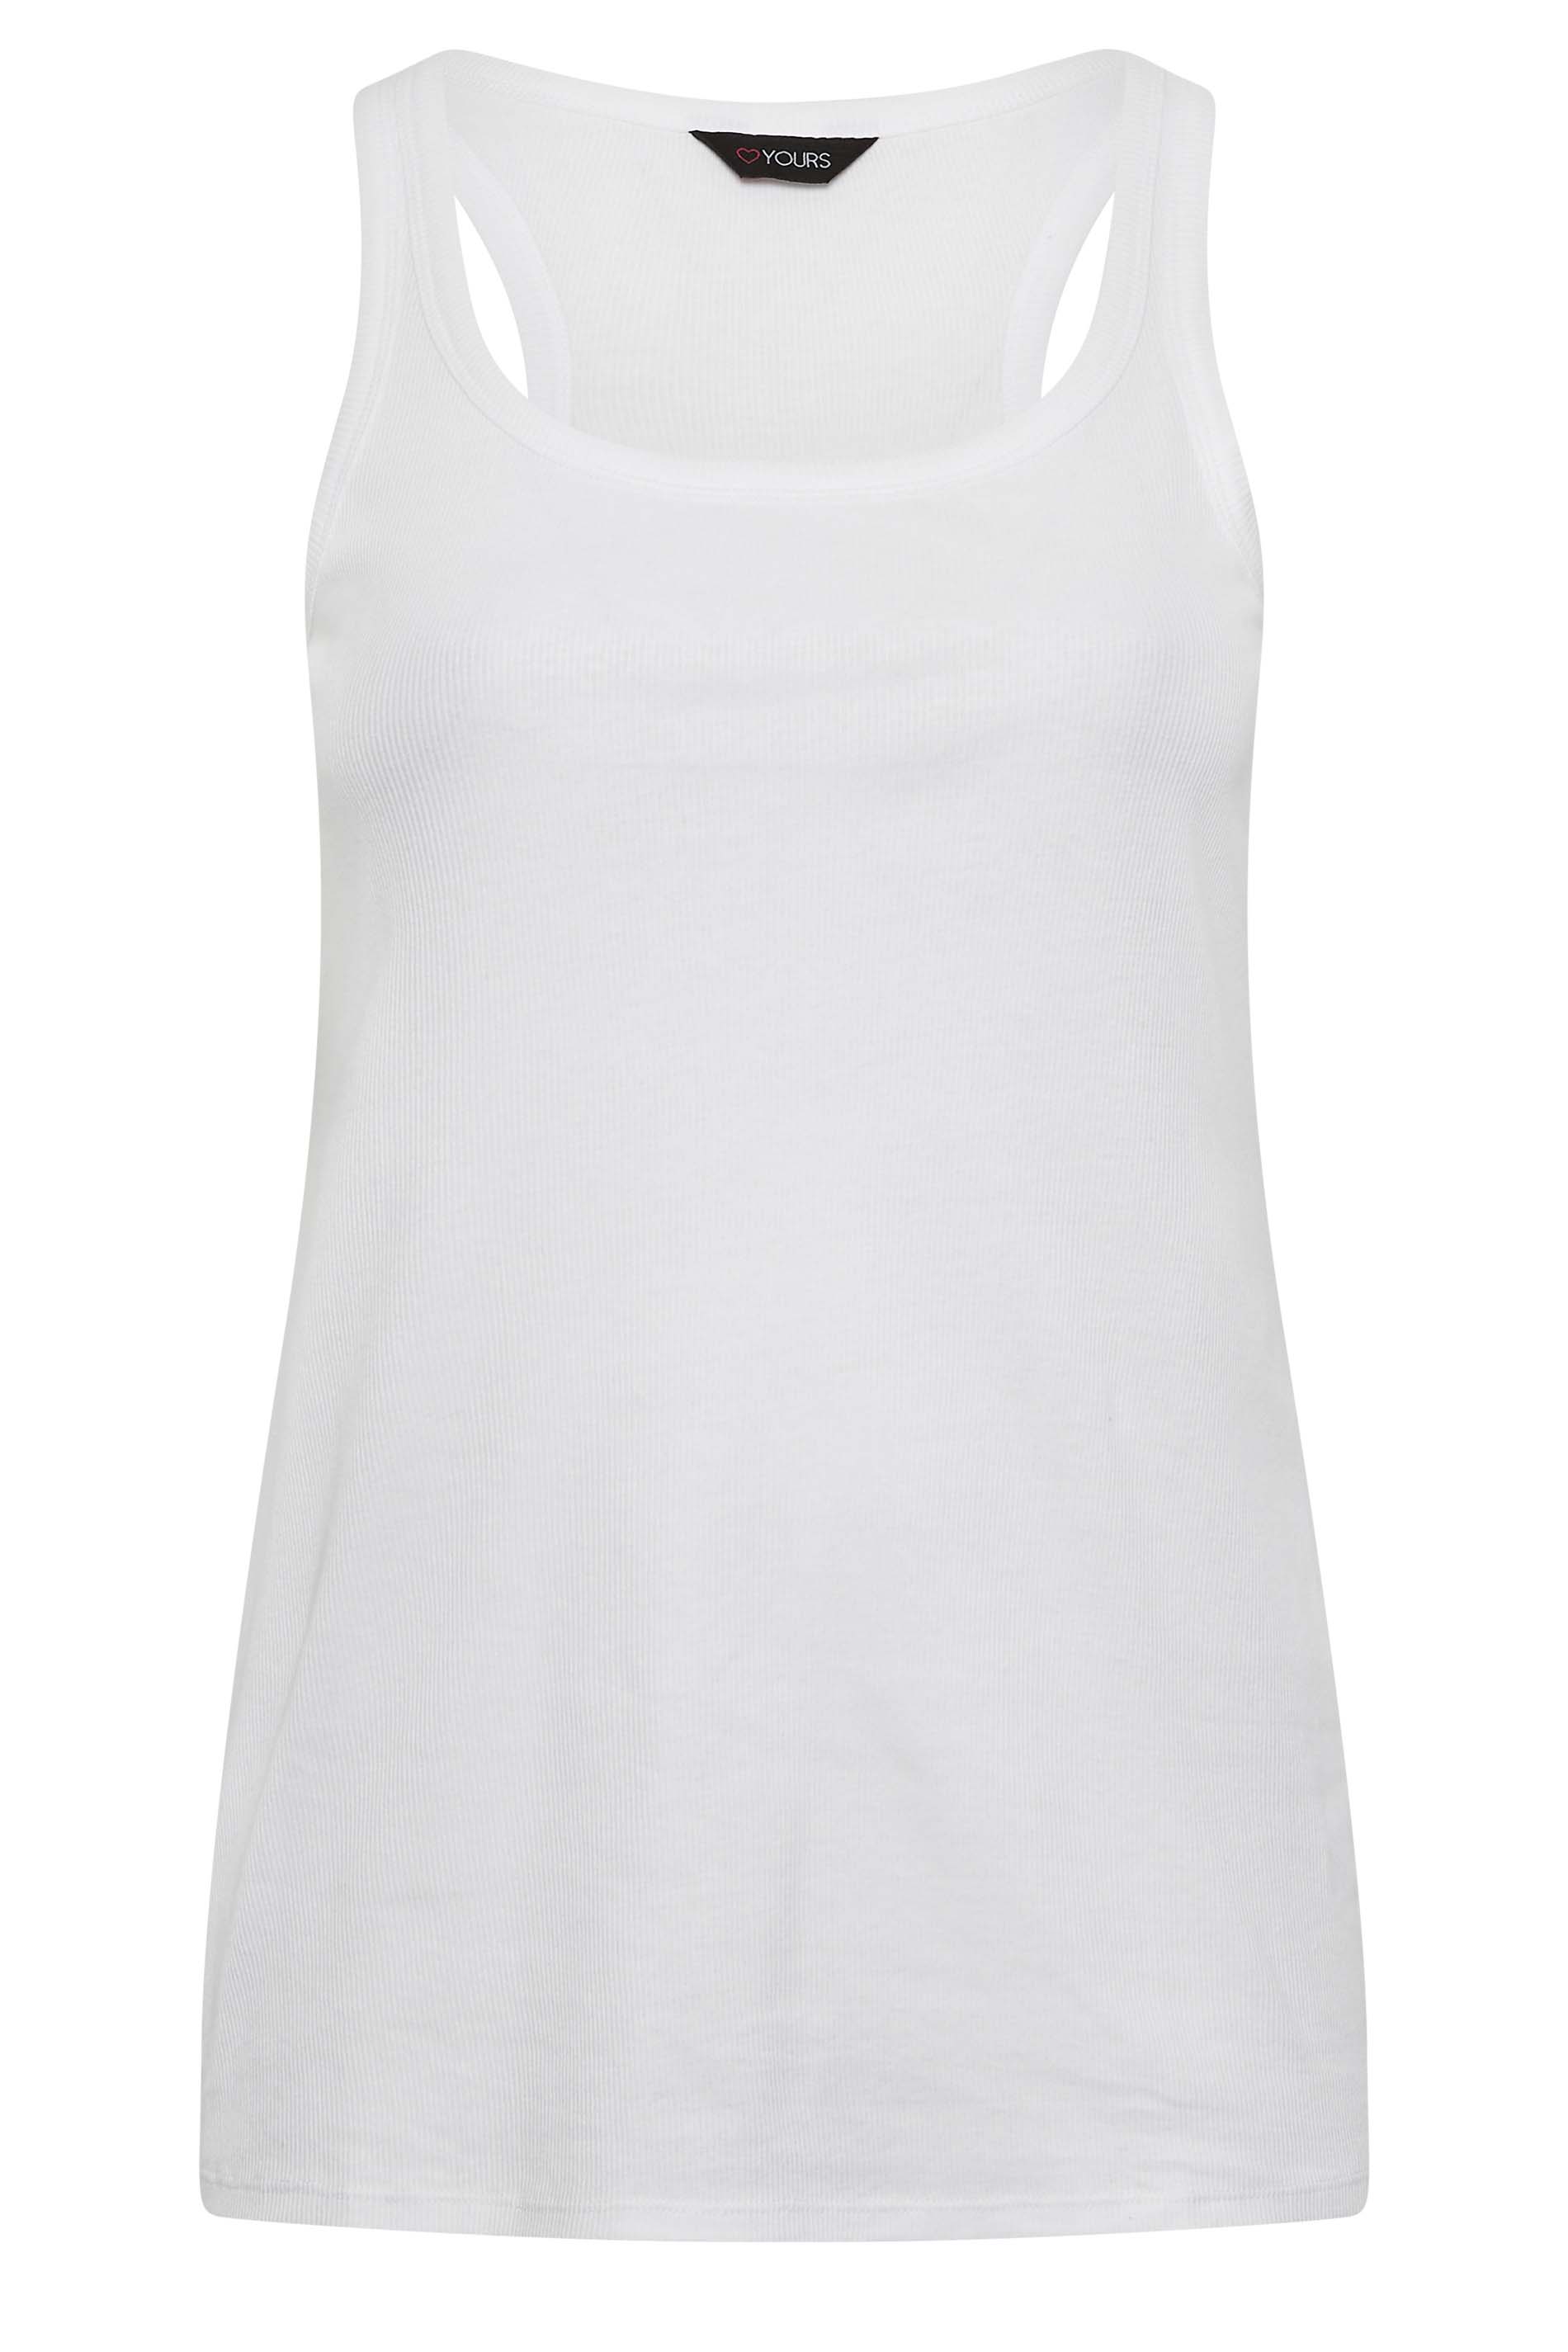 YOURS Plus Size White Ribbed Racer Back Vest Top